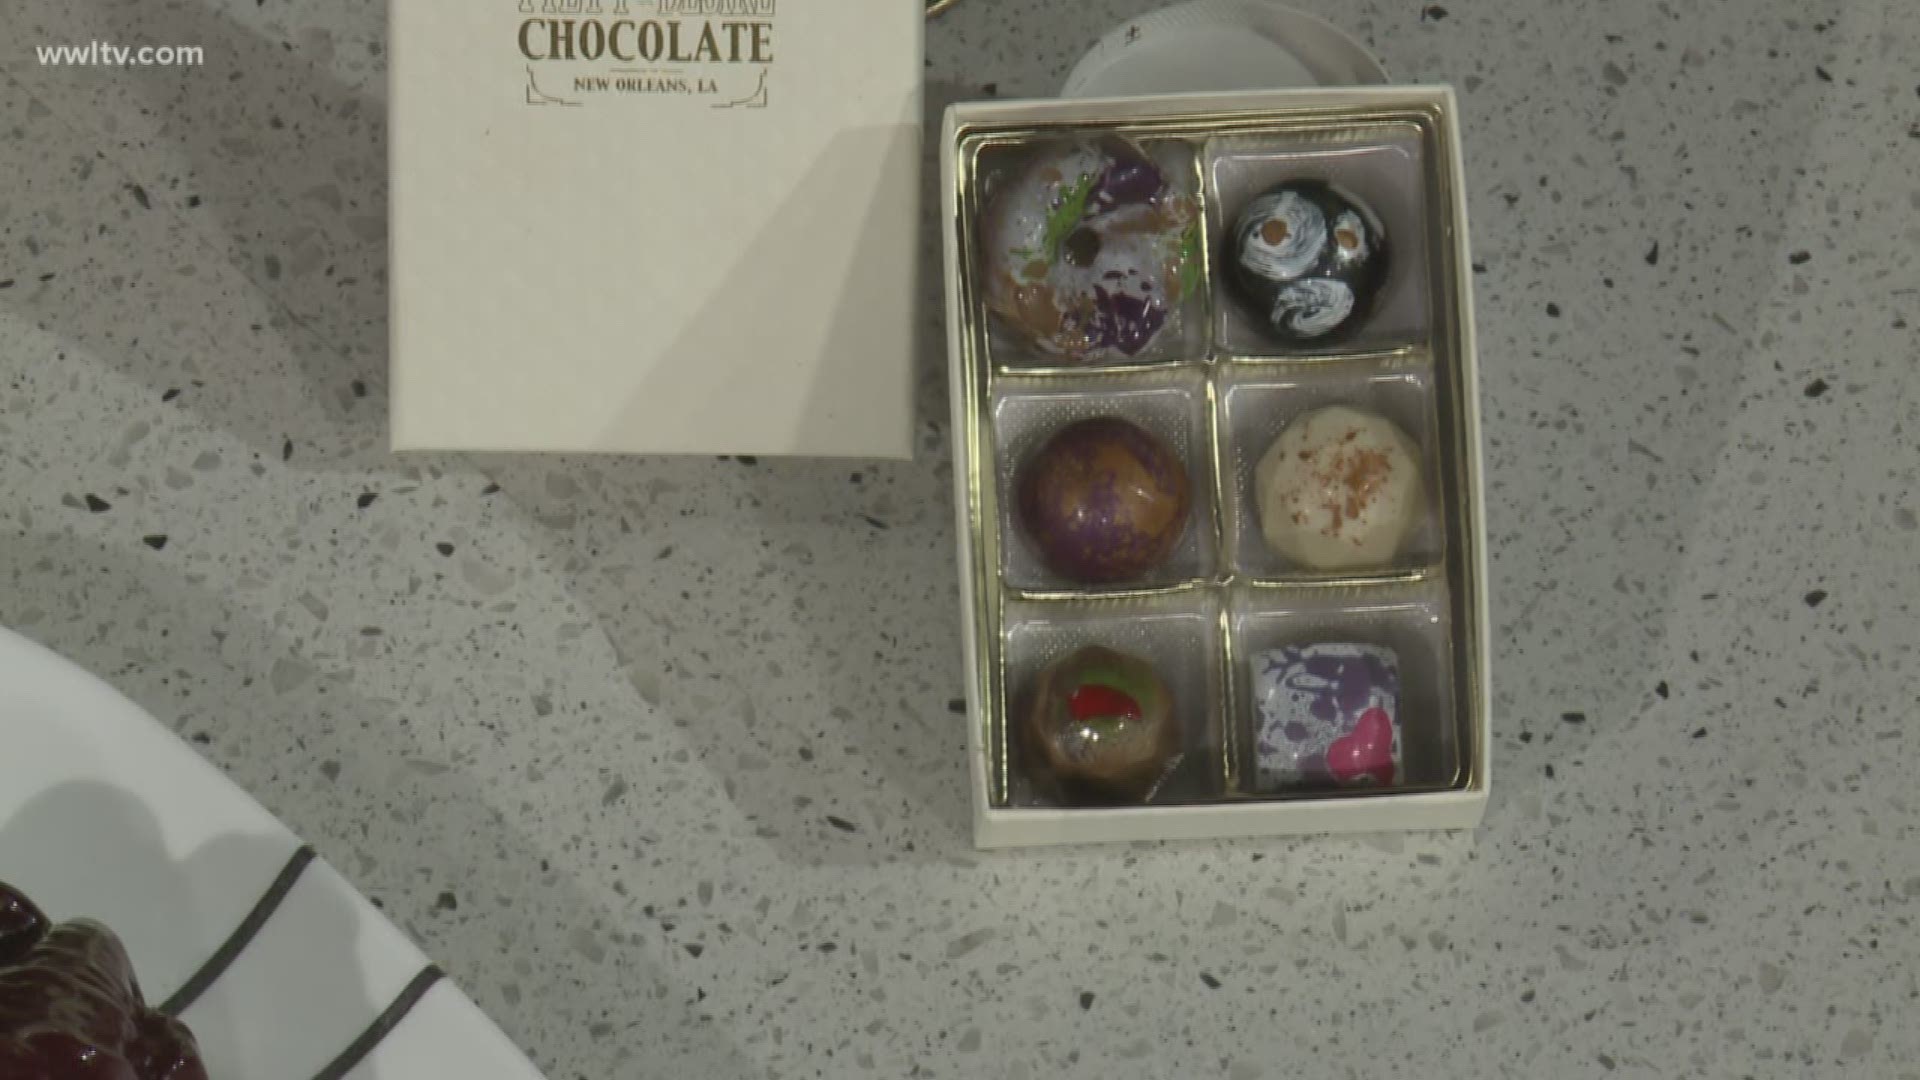 Chef Christopher Nobles from Piety and Desire Chocolates is in the kitchen with some sweet Valentines day treats made with love.